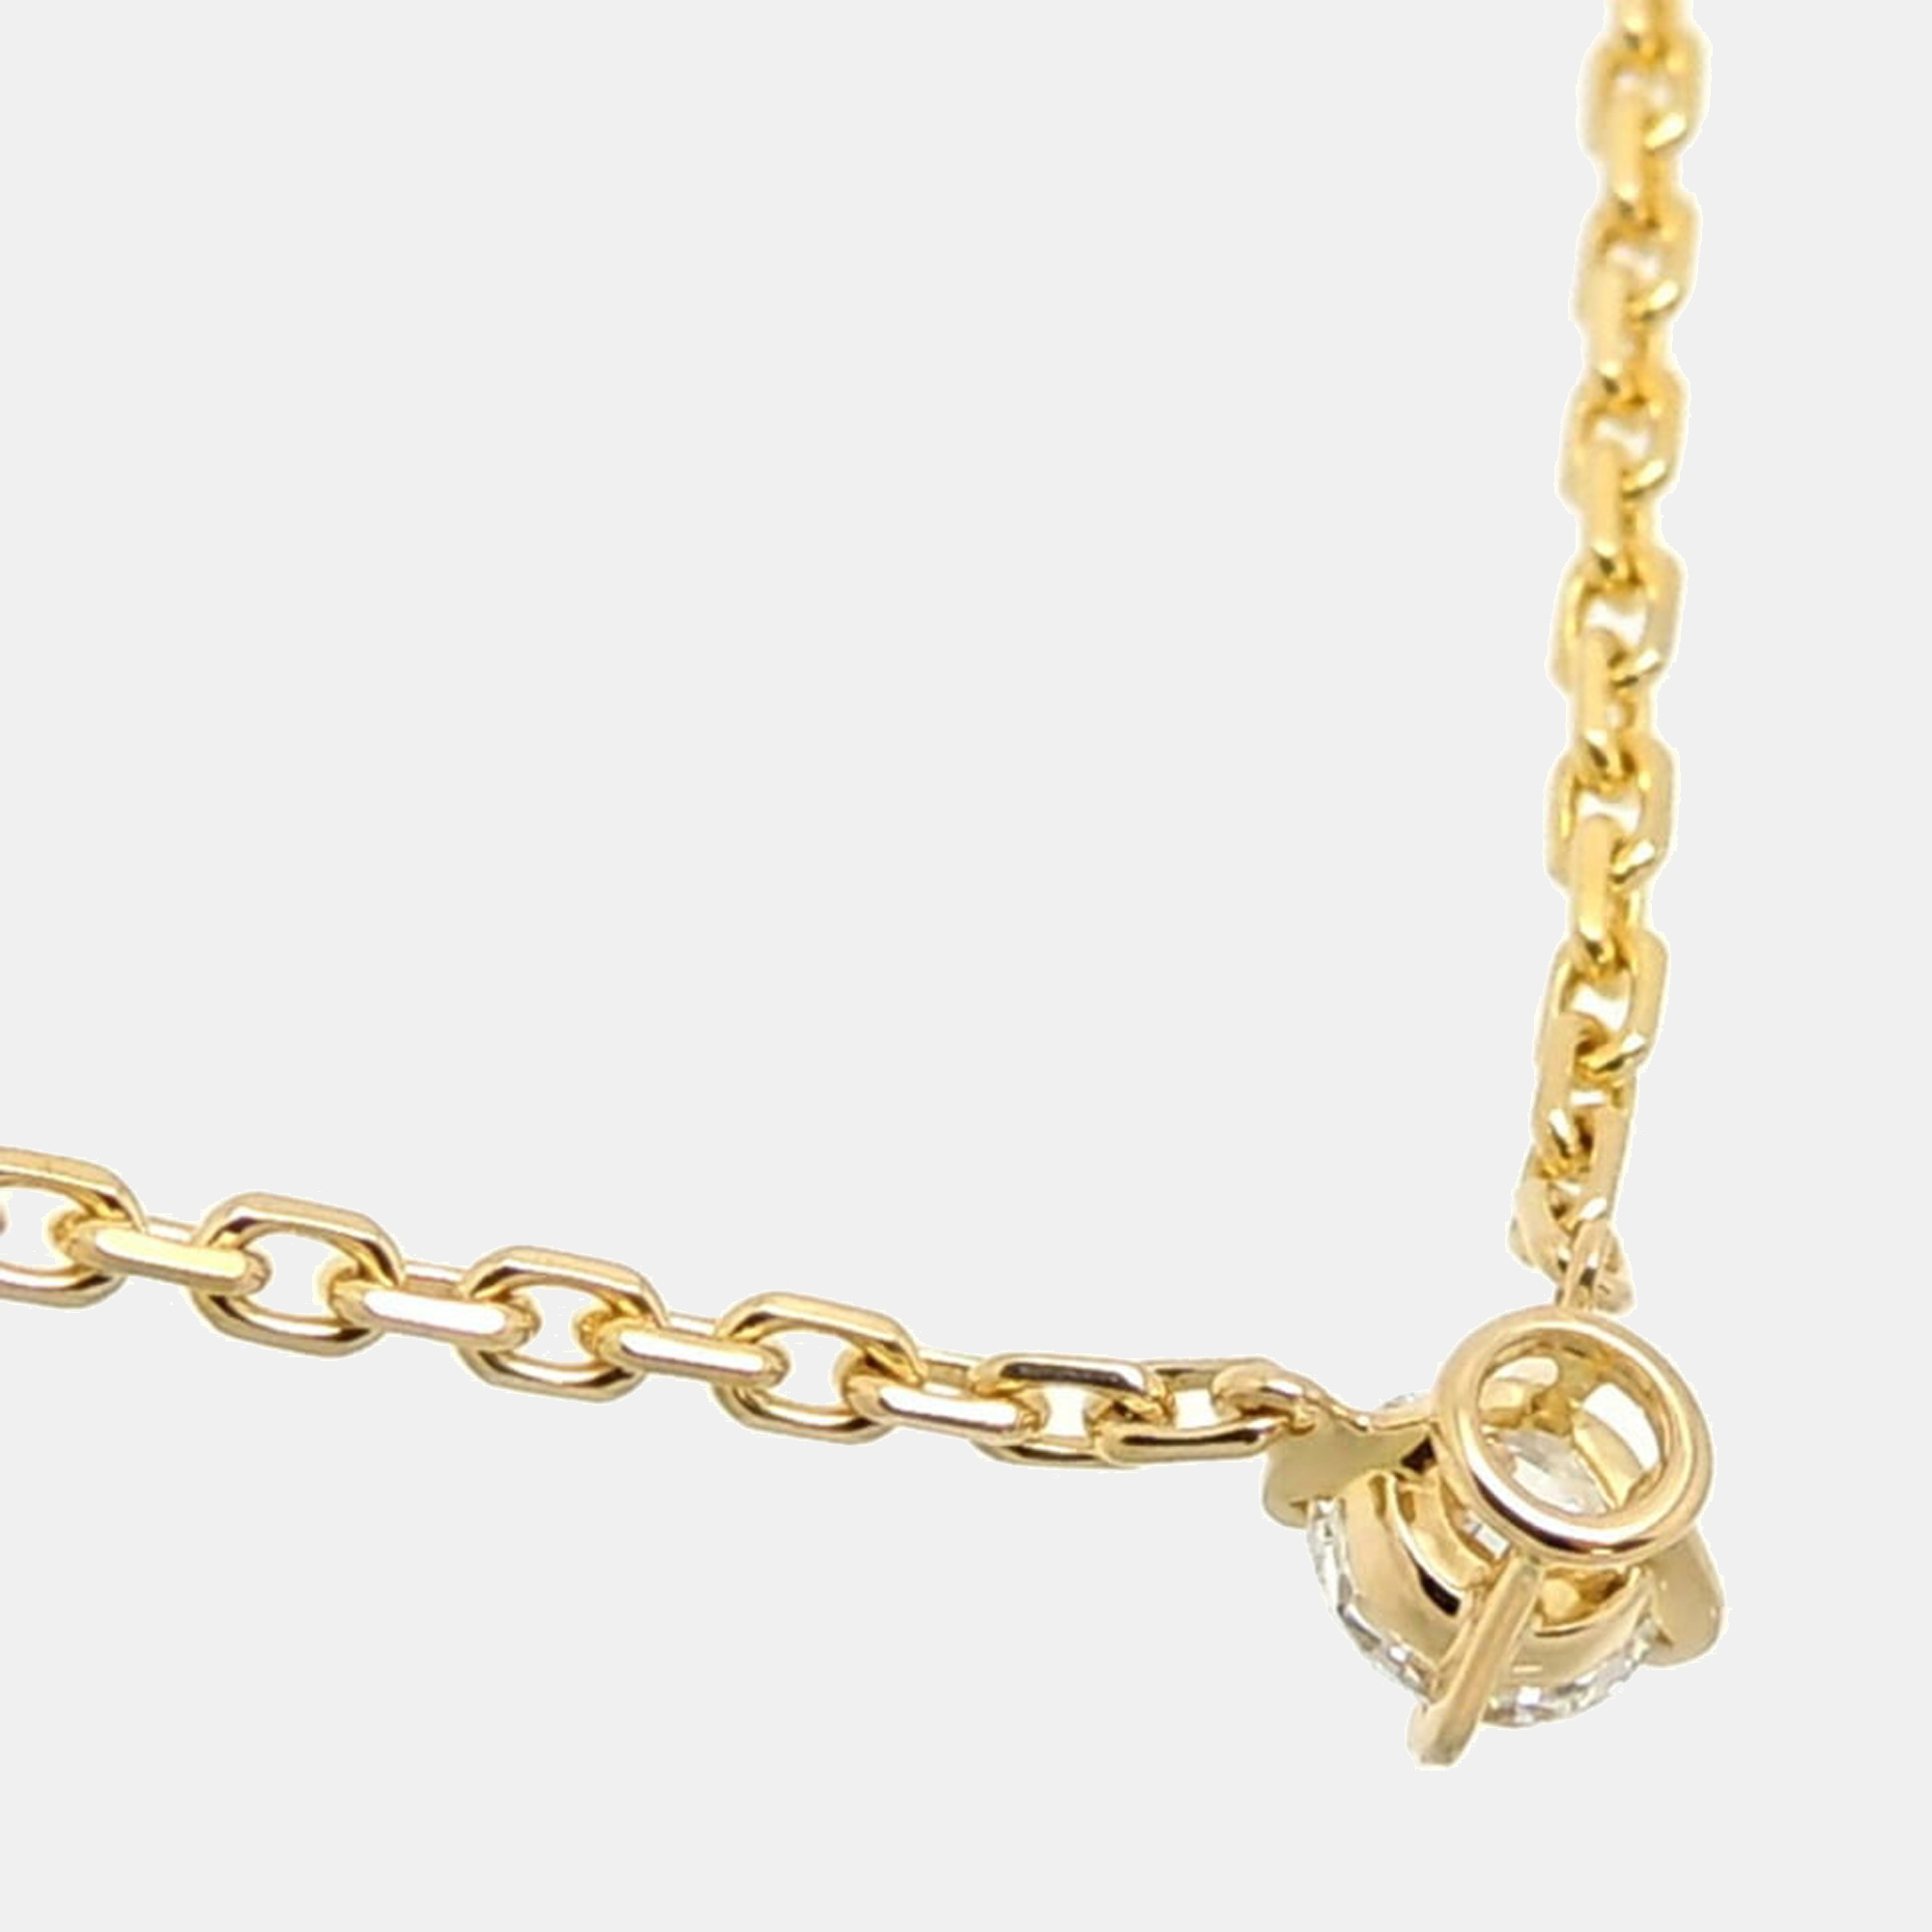 Cartier Love Support 18K Yellow Gold Diamond Necklace